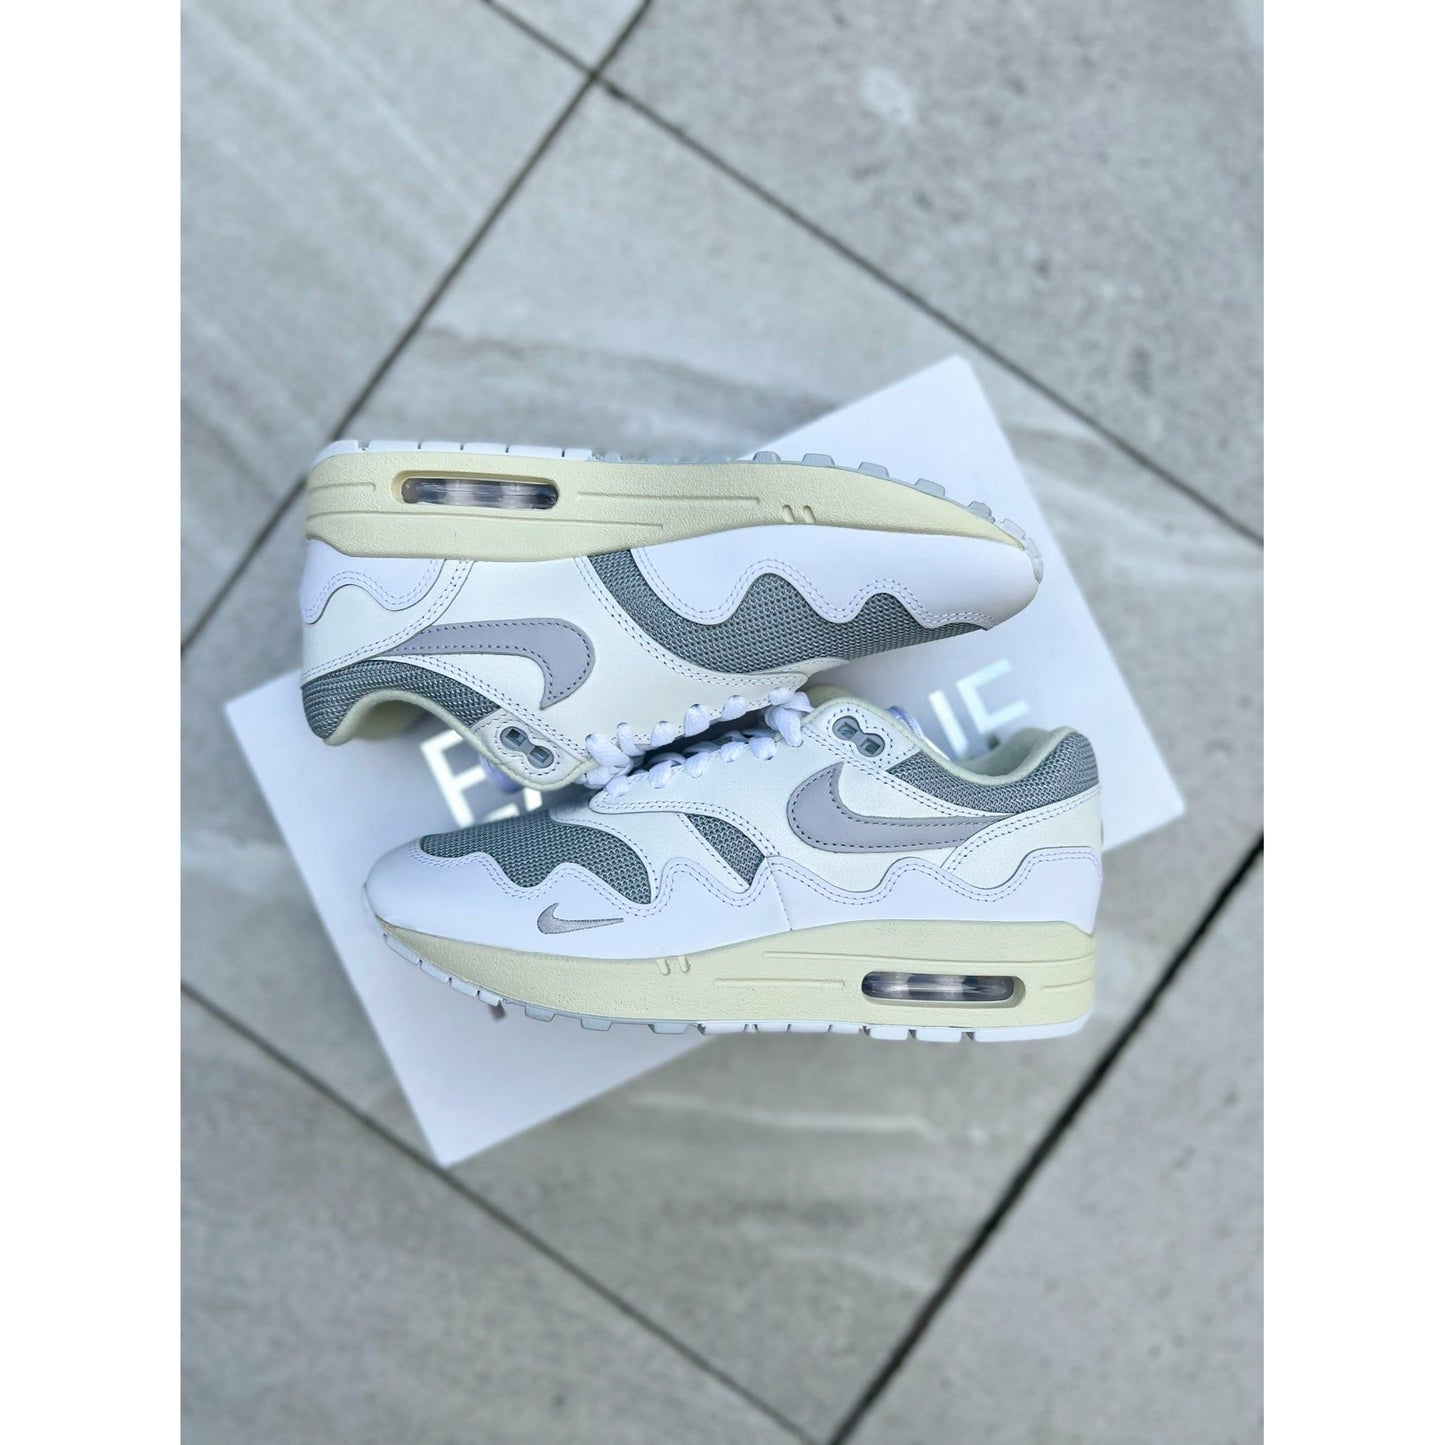 Nike Air Max 1 Patta Waves White from Nike